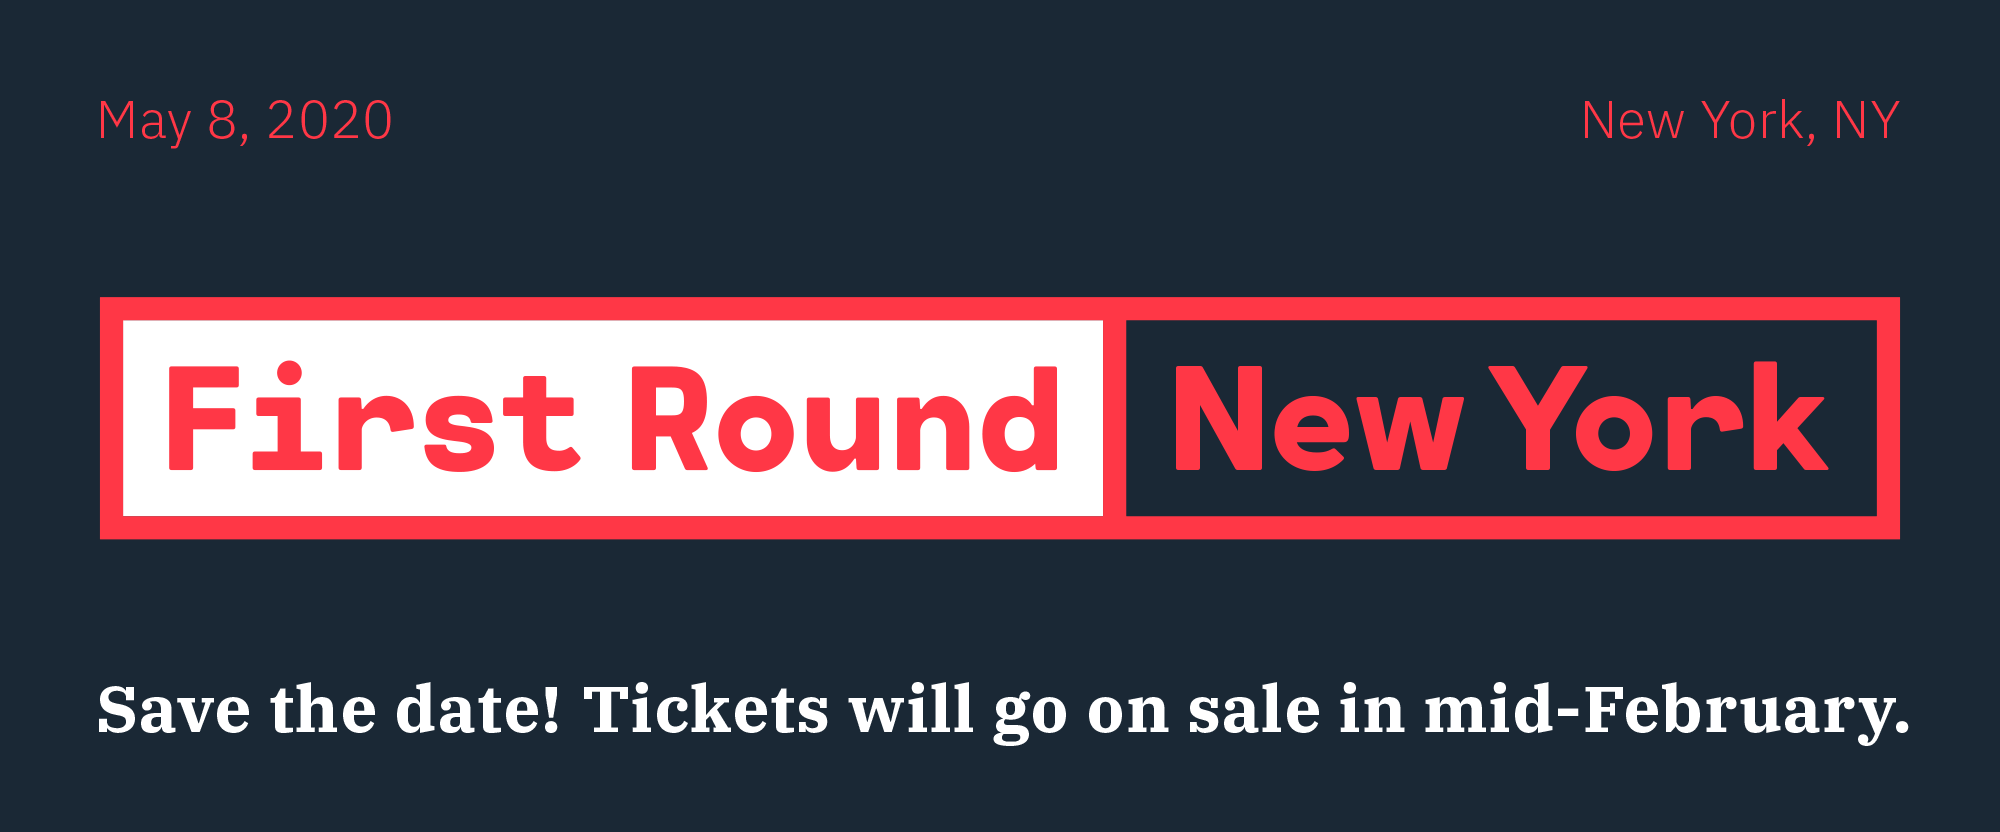 First Round 2020 - New York: Save the Date